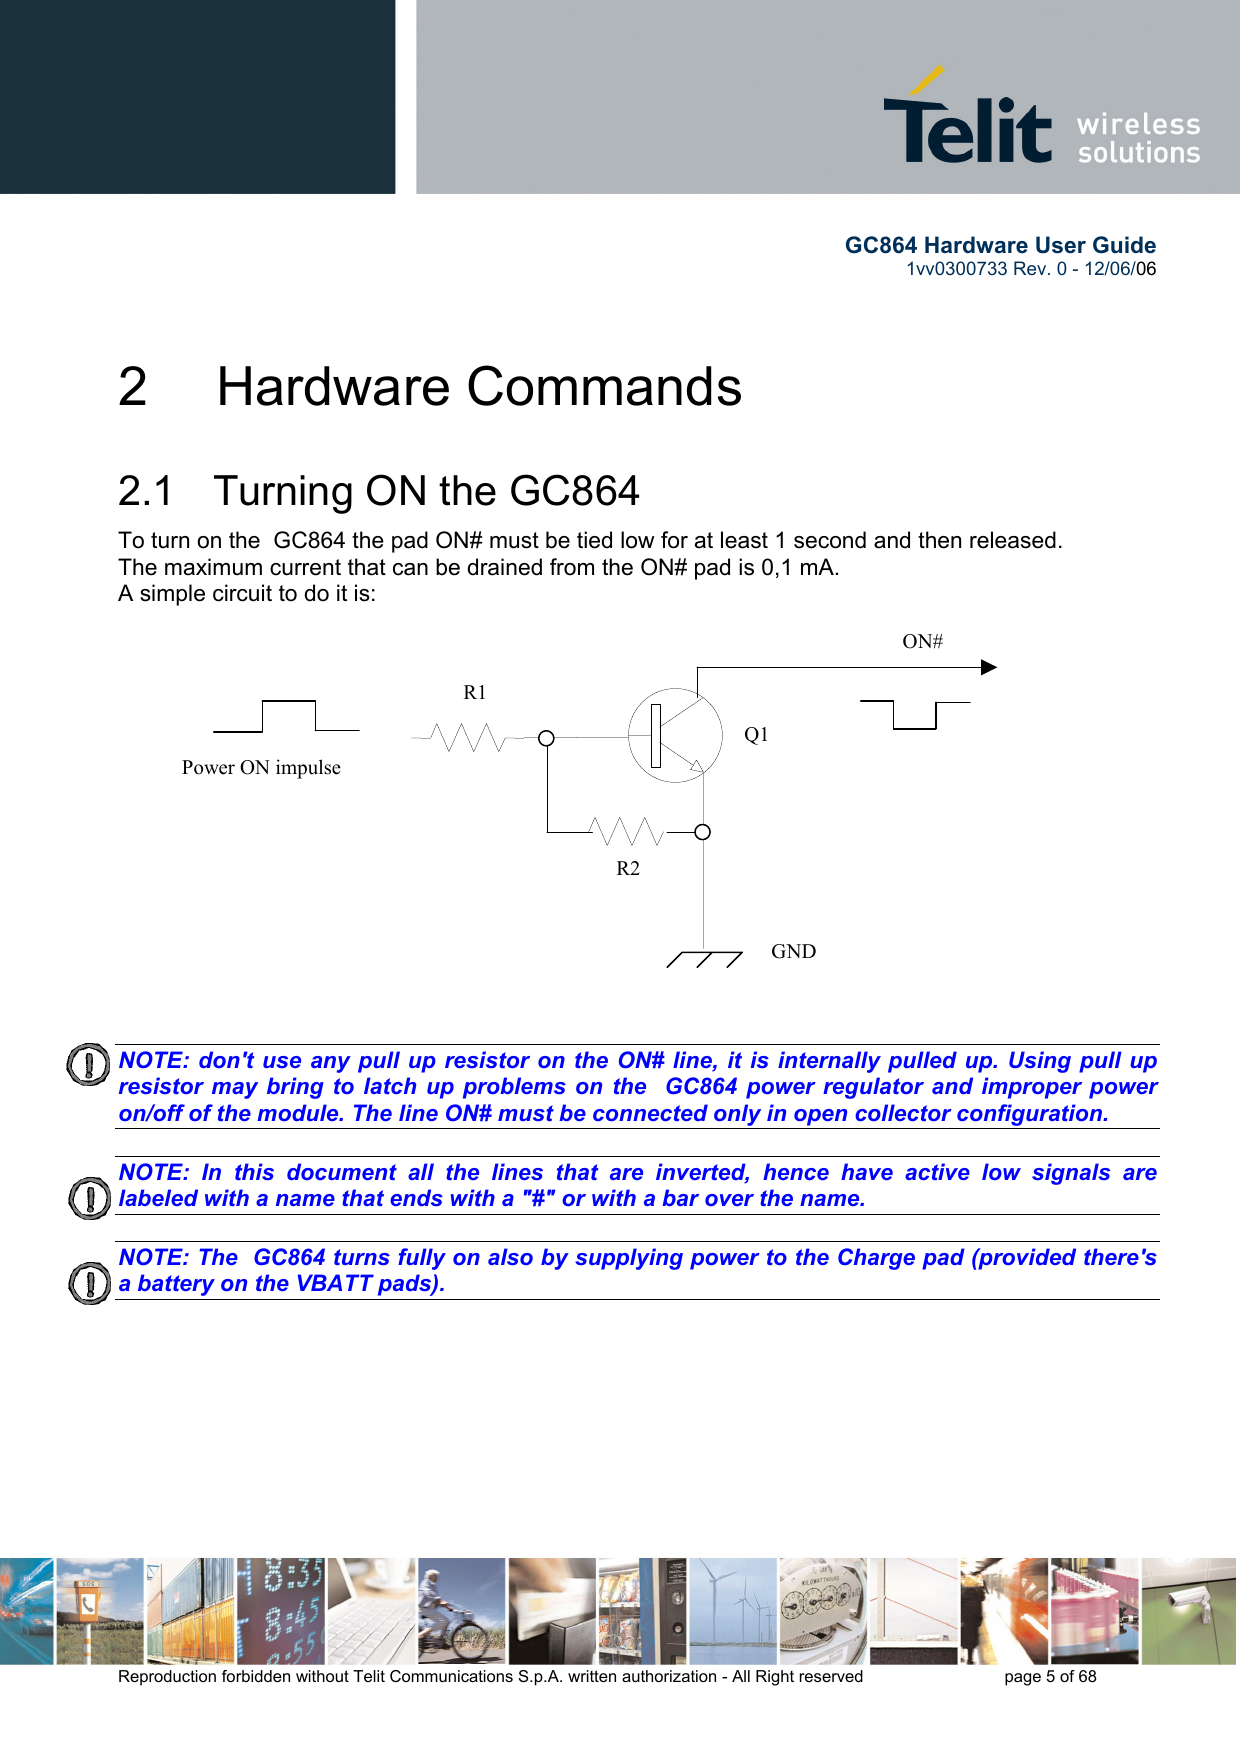        GC864 Hardware User Guide  1vv0300733 Rev. 0 - 12/06/06  Reproduction forbidden without Telit Communications S.p.A. written authorization - All Right reserved    page 5 of 68  2   Hardware Commands 2.1   Turning ON the GC864 To turn on the  GC864 the pad ON# must be tied low for at least 1 second and then released. The maximum current that can be drained from the ON# pad is 0,1 mA. A simple circuit to do it is:   NOTE: don&apos;t use any pull up resistor on the ON# line, it is internally pulled up. Using pull up resistor may bring to latch up problems on the  GC864 power regulator and improper power on/off of the module. The line ON# must be connected only in open collector configuration.  NOTE: In this document all the lines that are inverted, hence have active low signals are labeled with a name that ends with a &quot;#&quot; or with a bar over the name.  NOTE: The  GC864 turns fully on also by supplying power to the Charge pad (provided there&apos;s a battery on the VBATT pads).            ON#Power ON impulse  GNDR1R2Q1